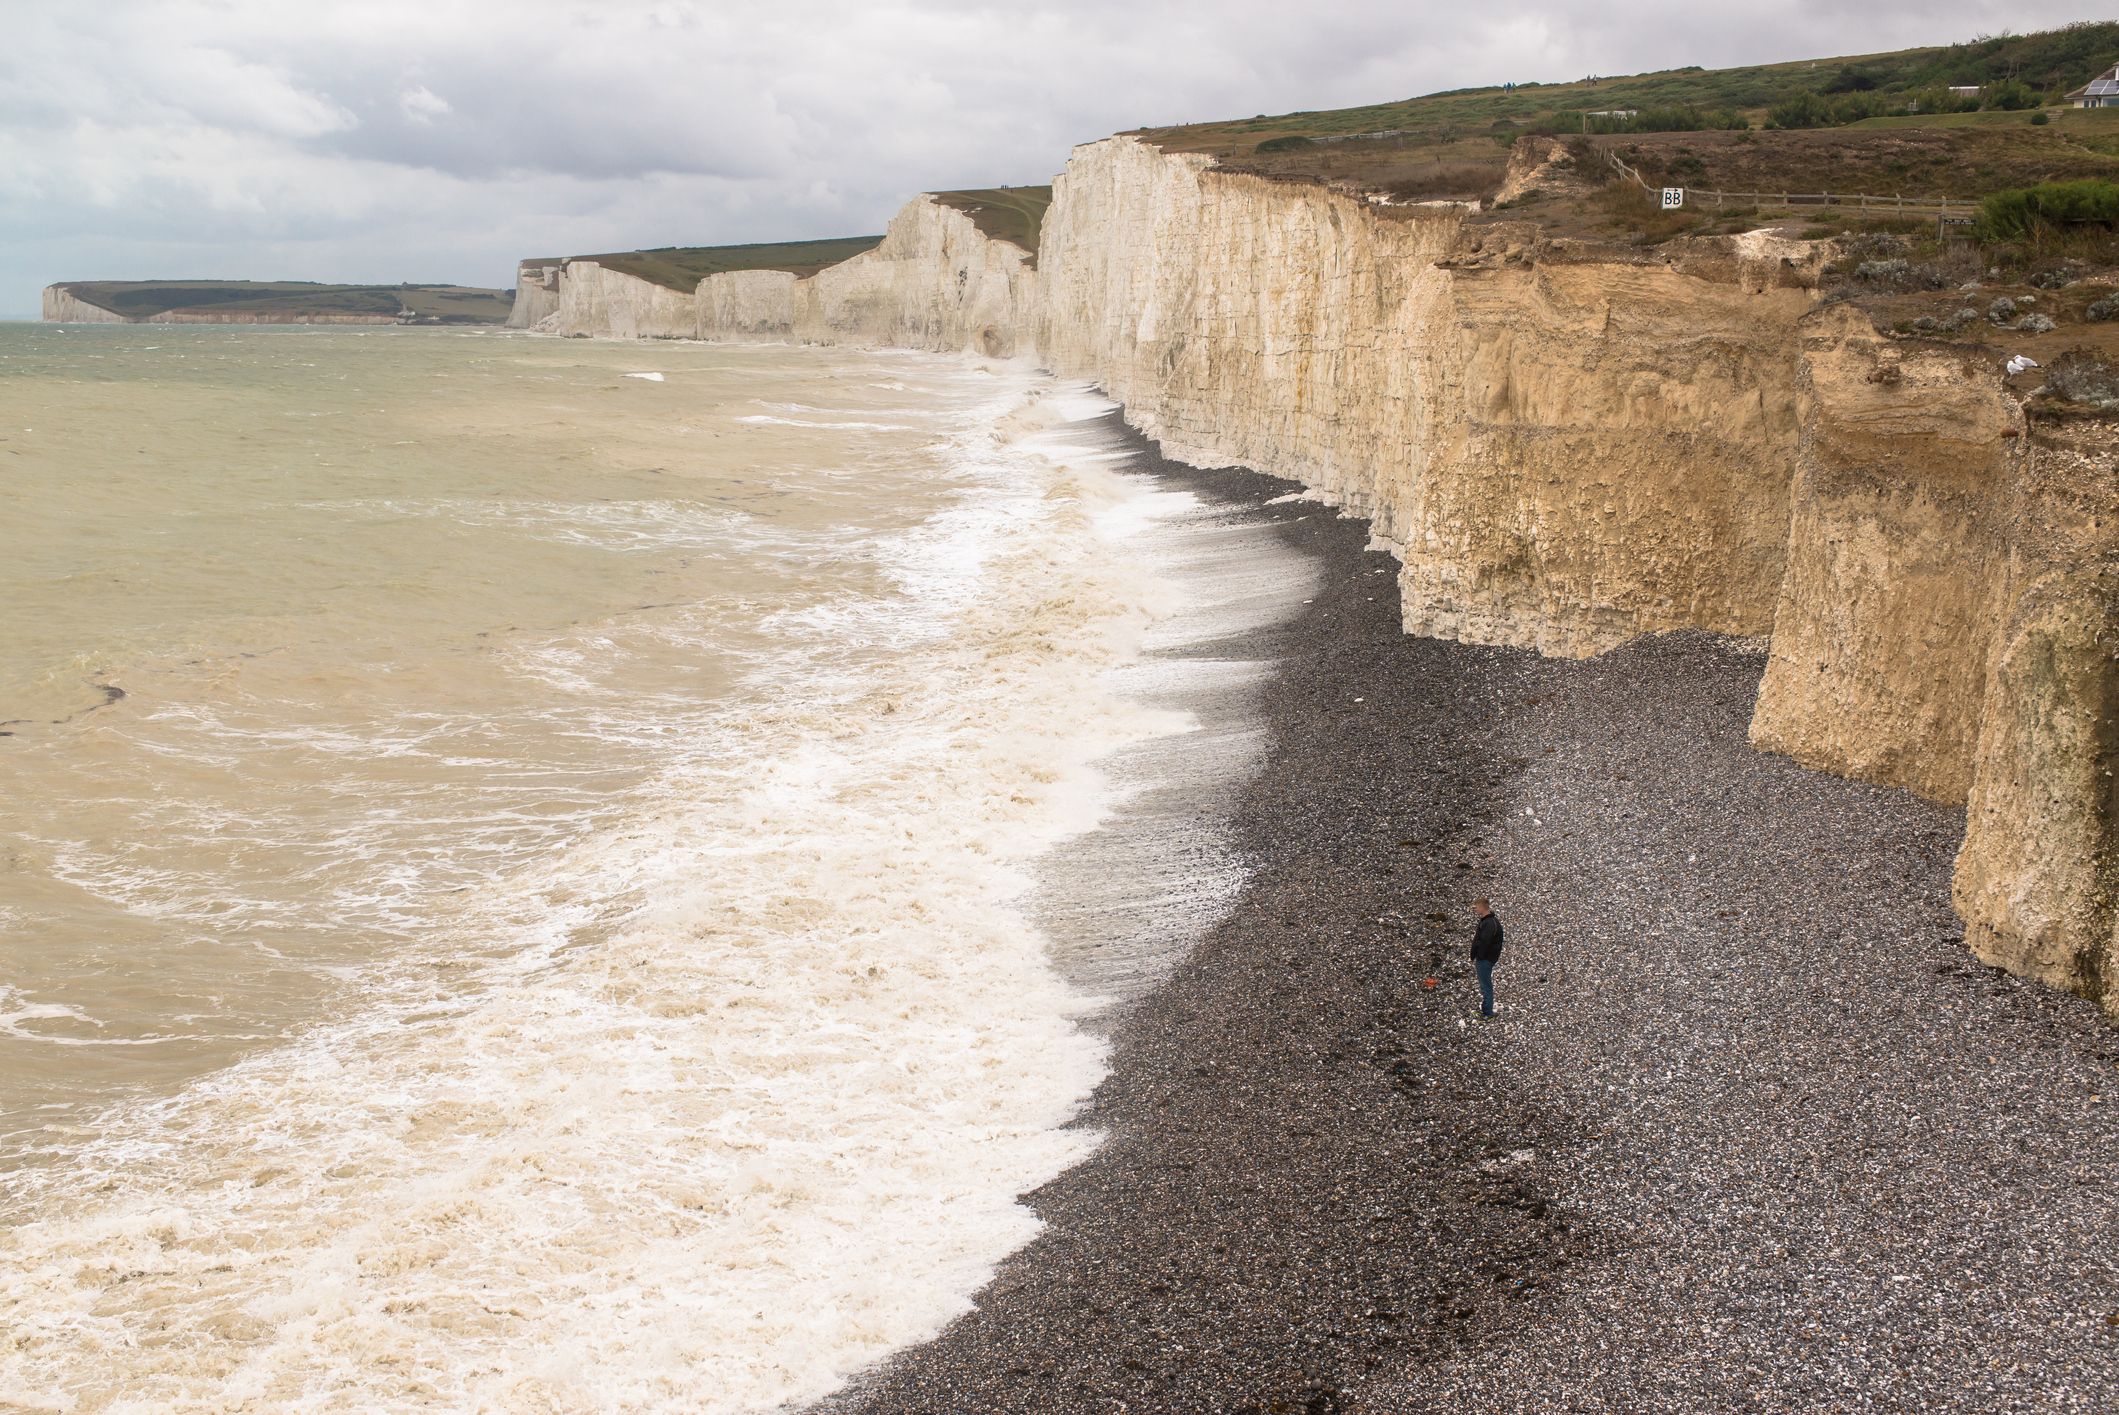 Solitary man standing alone on a gravel beach below the white cliffs of Seven Sisters facing rough sea and waves.